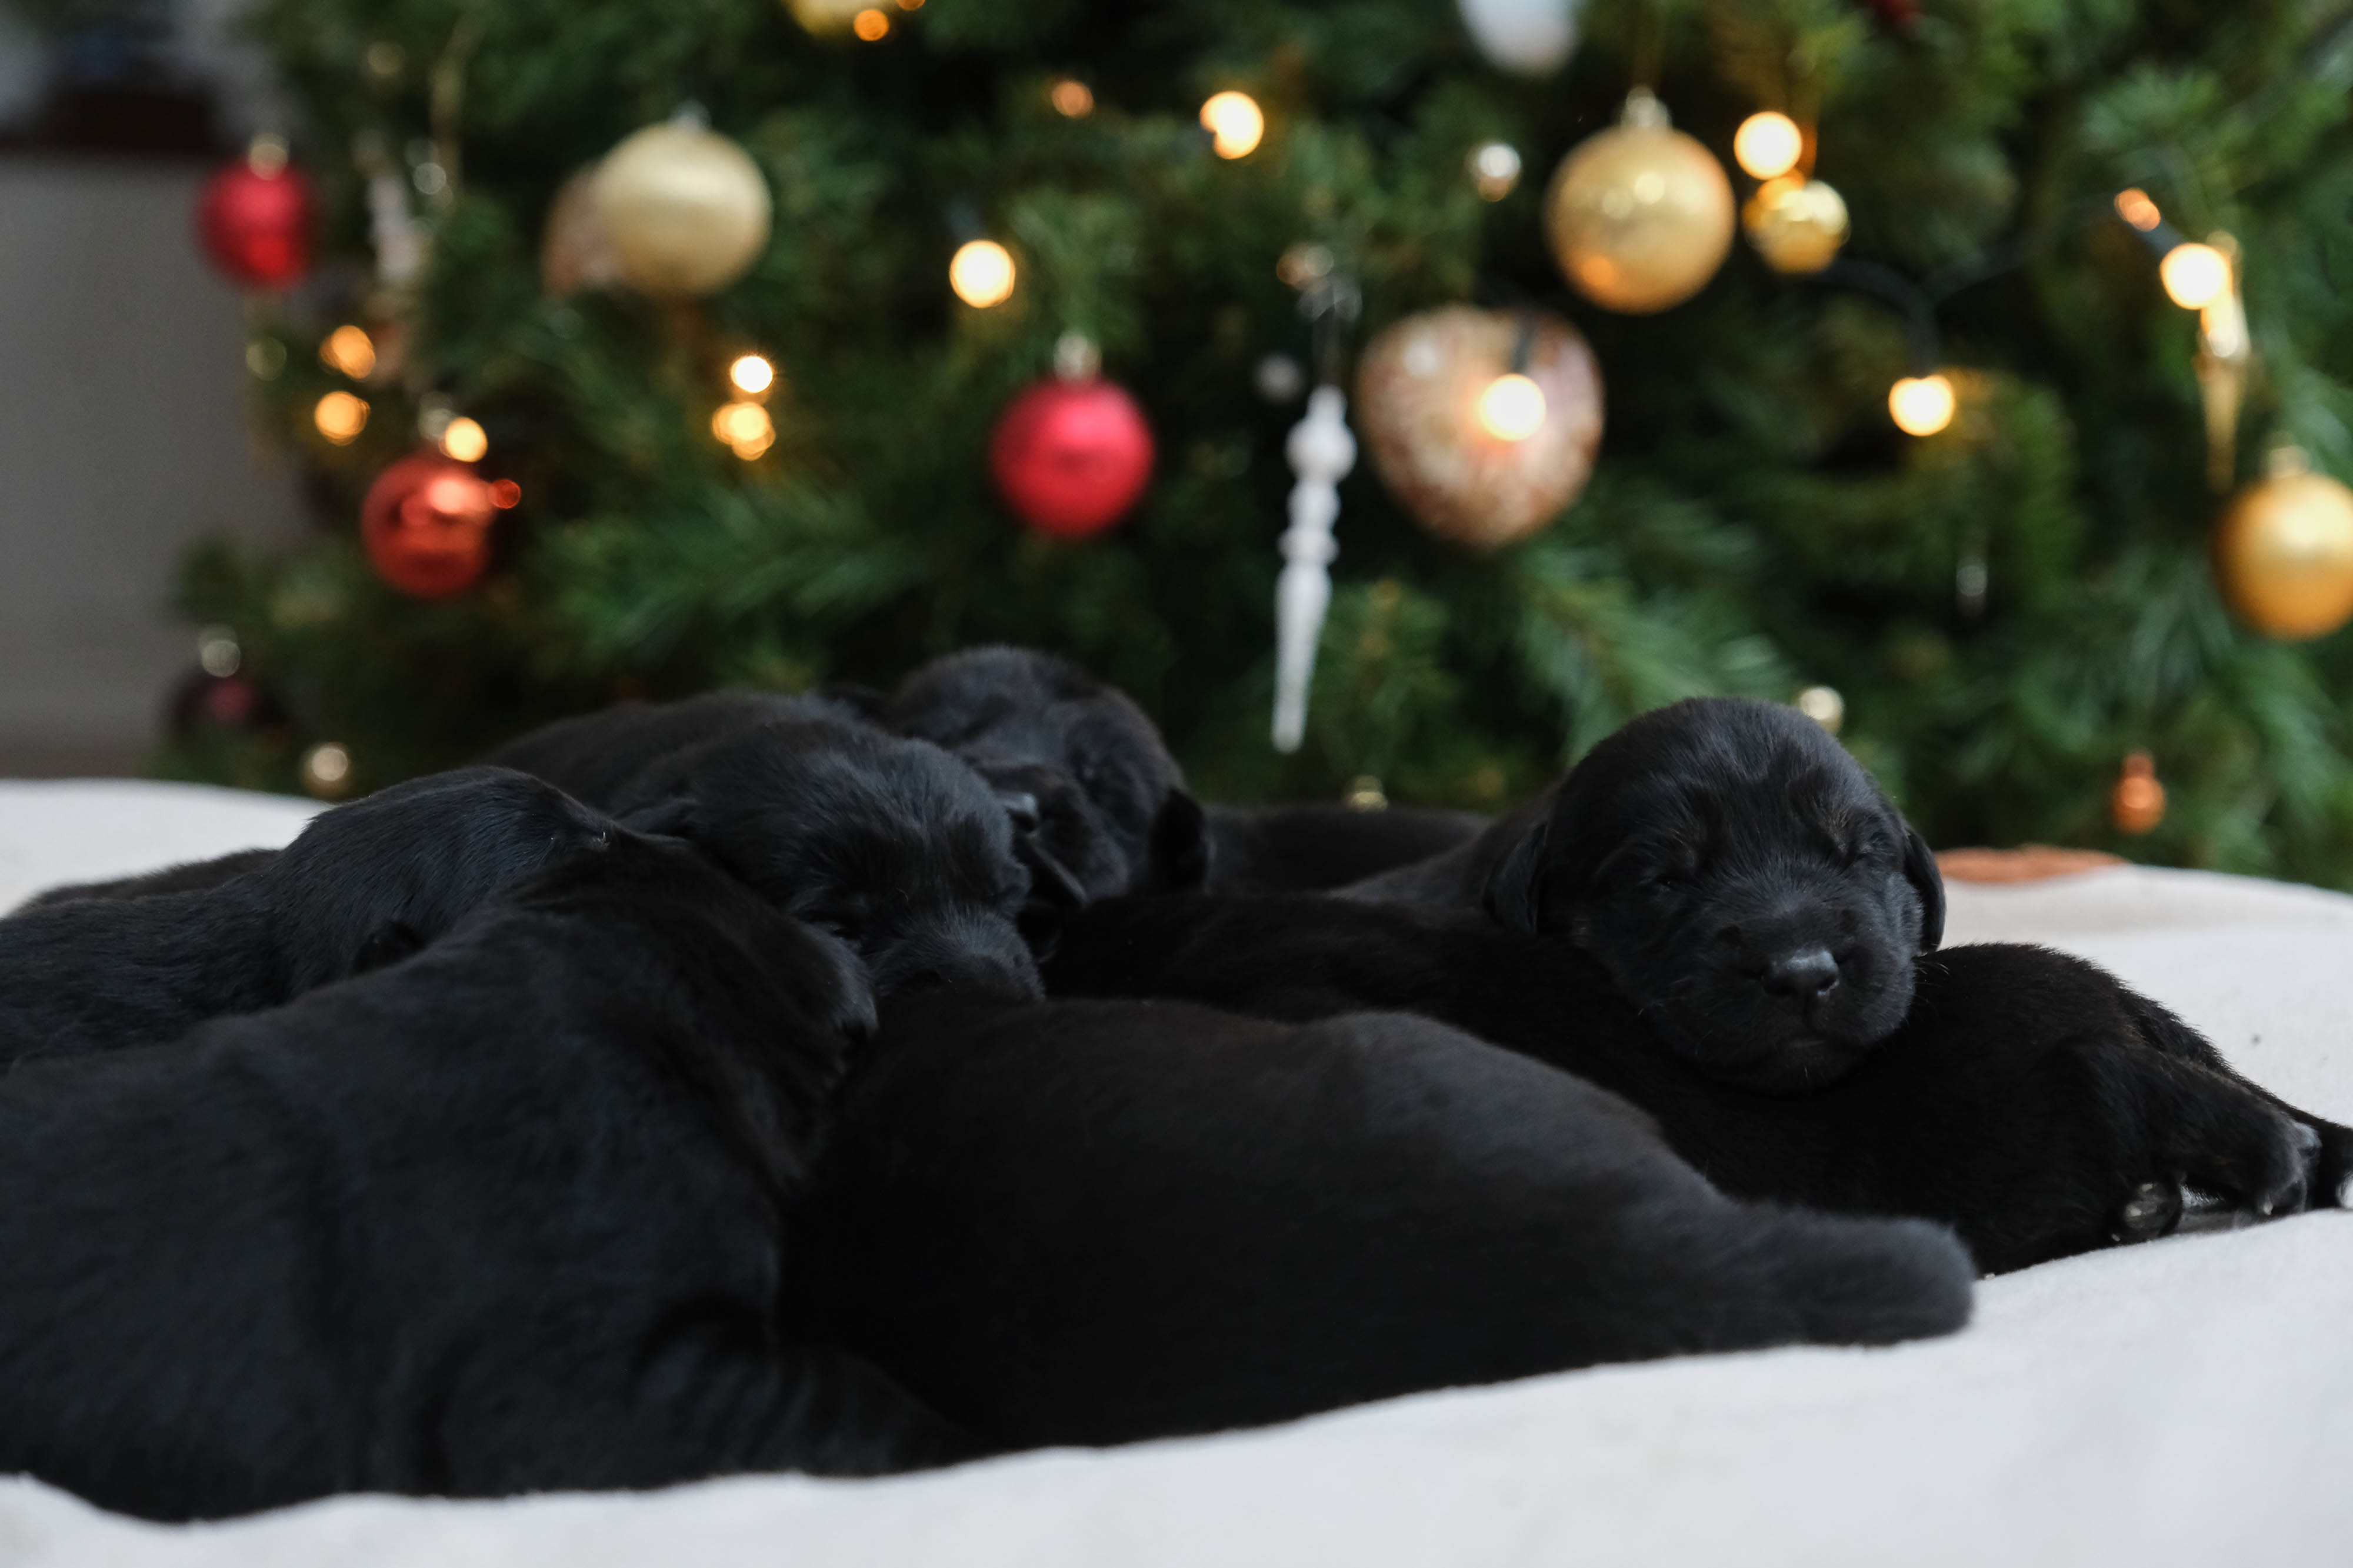 The nine puppies with black fur sitting in front of a Christmas tree